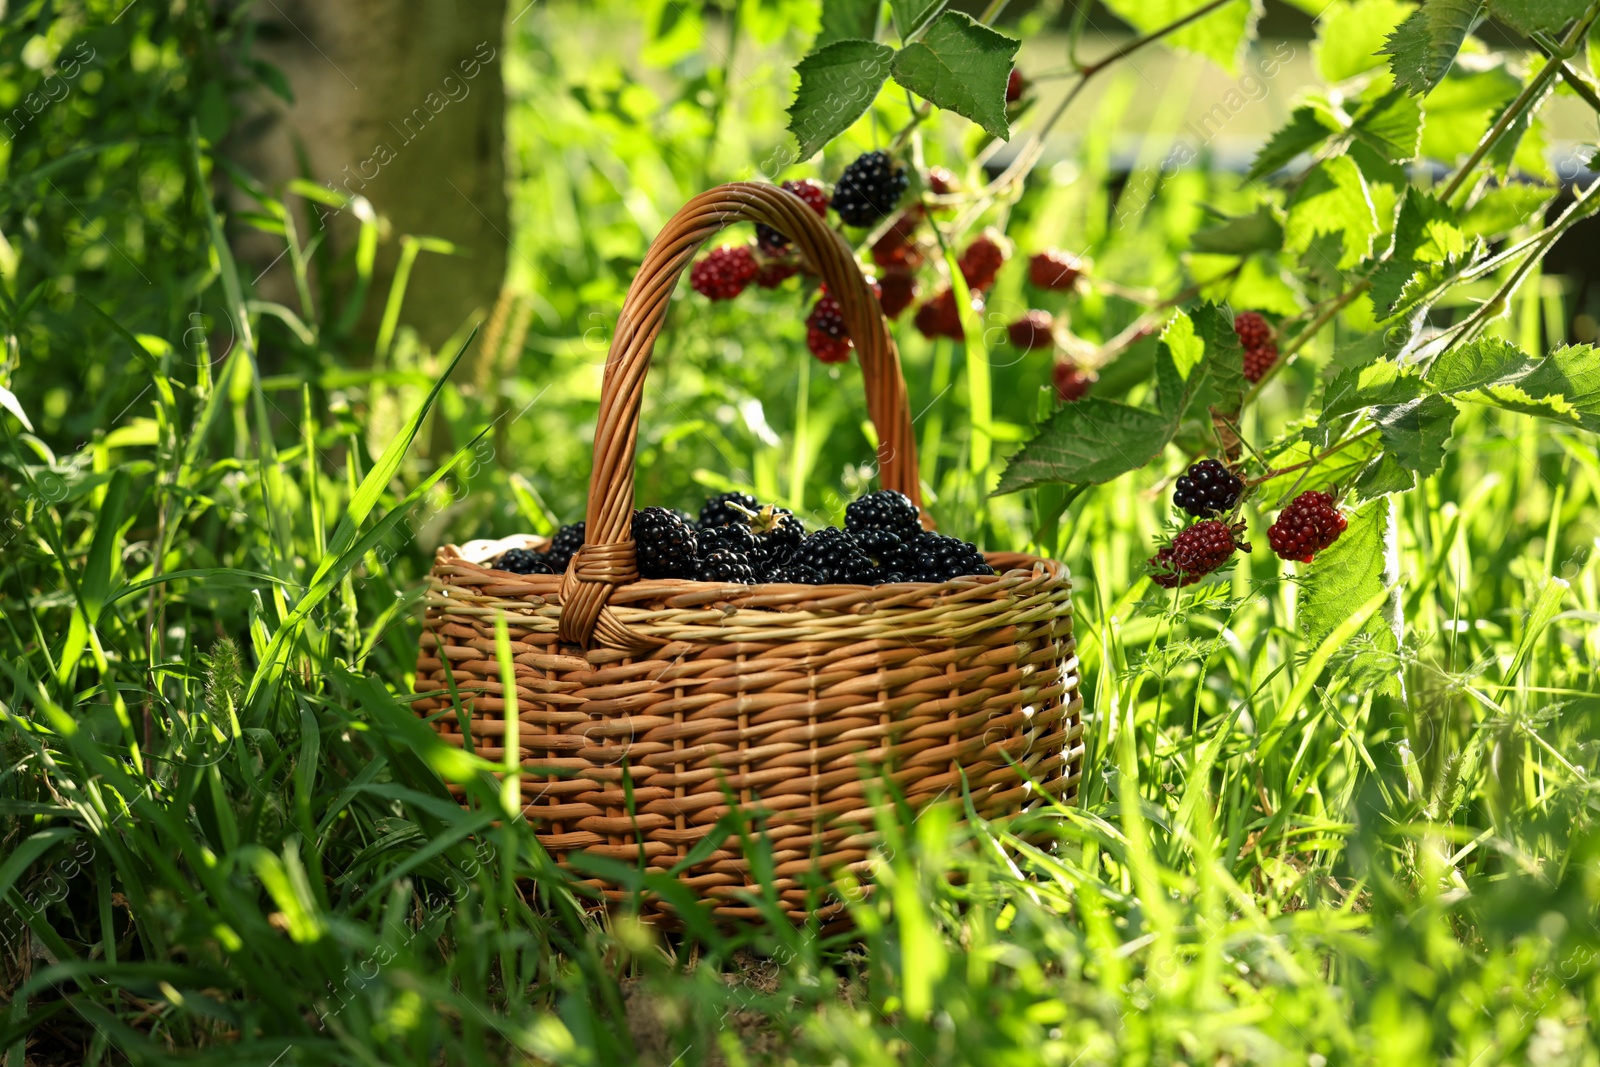 Photo of Wicker basket with ripe blackberries on green grass outdoors